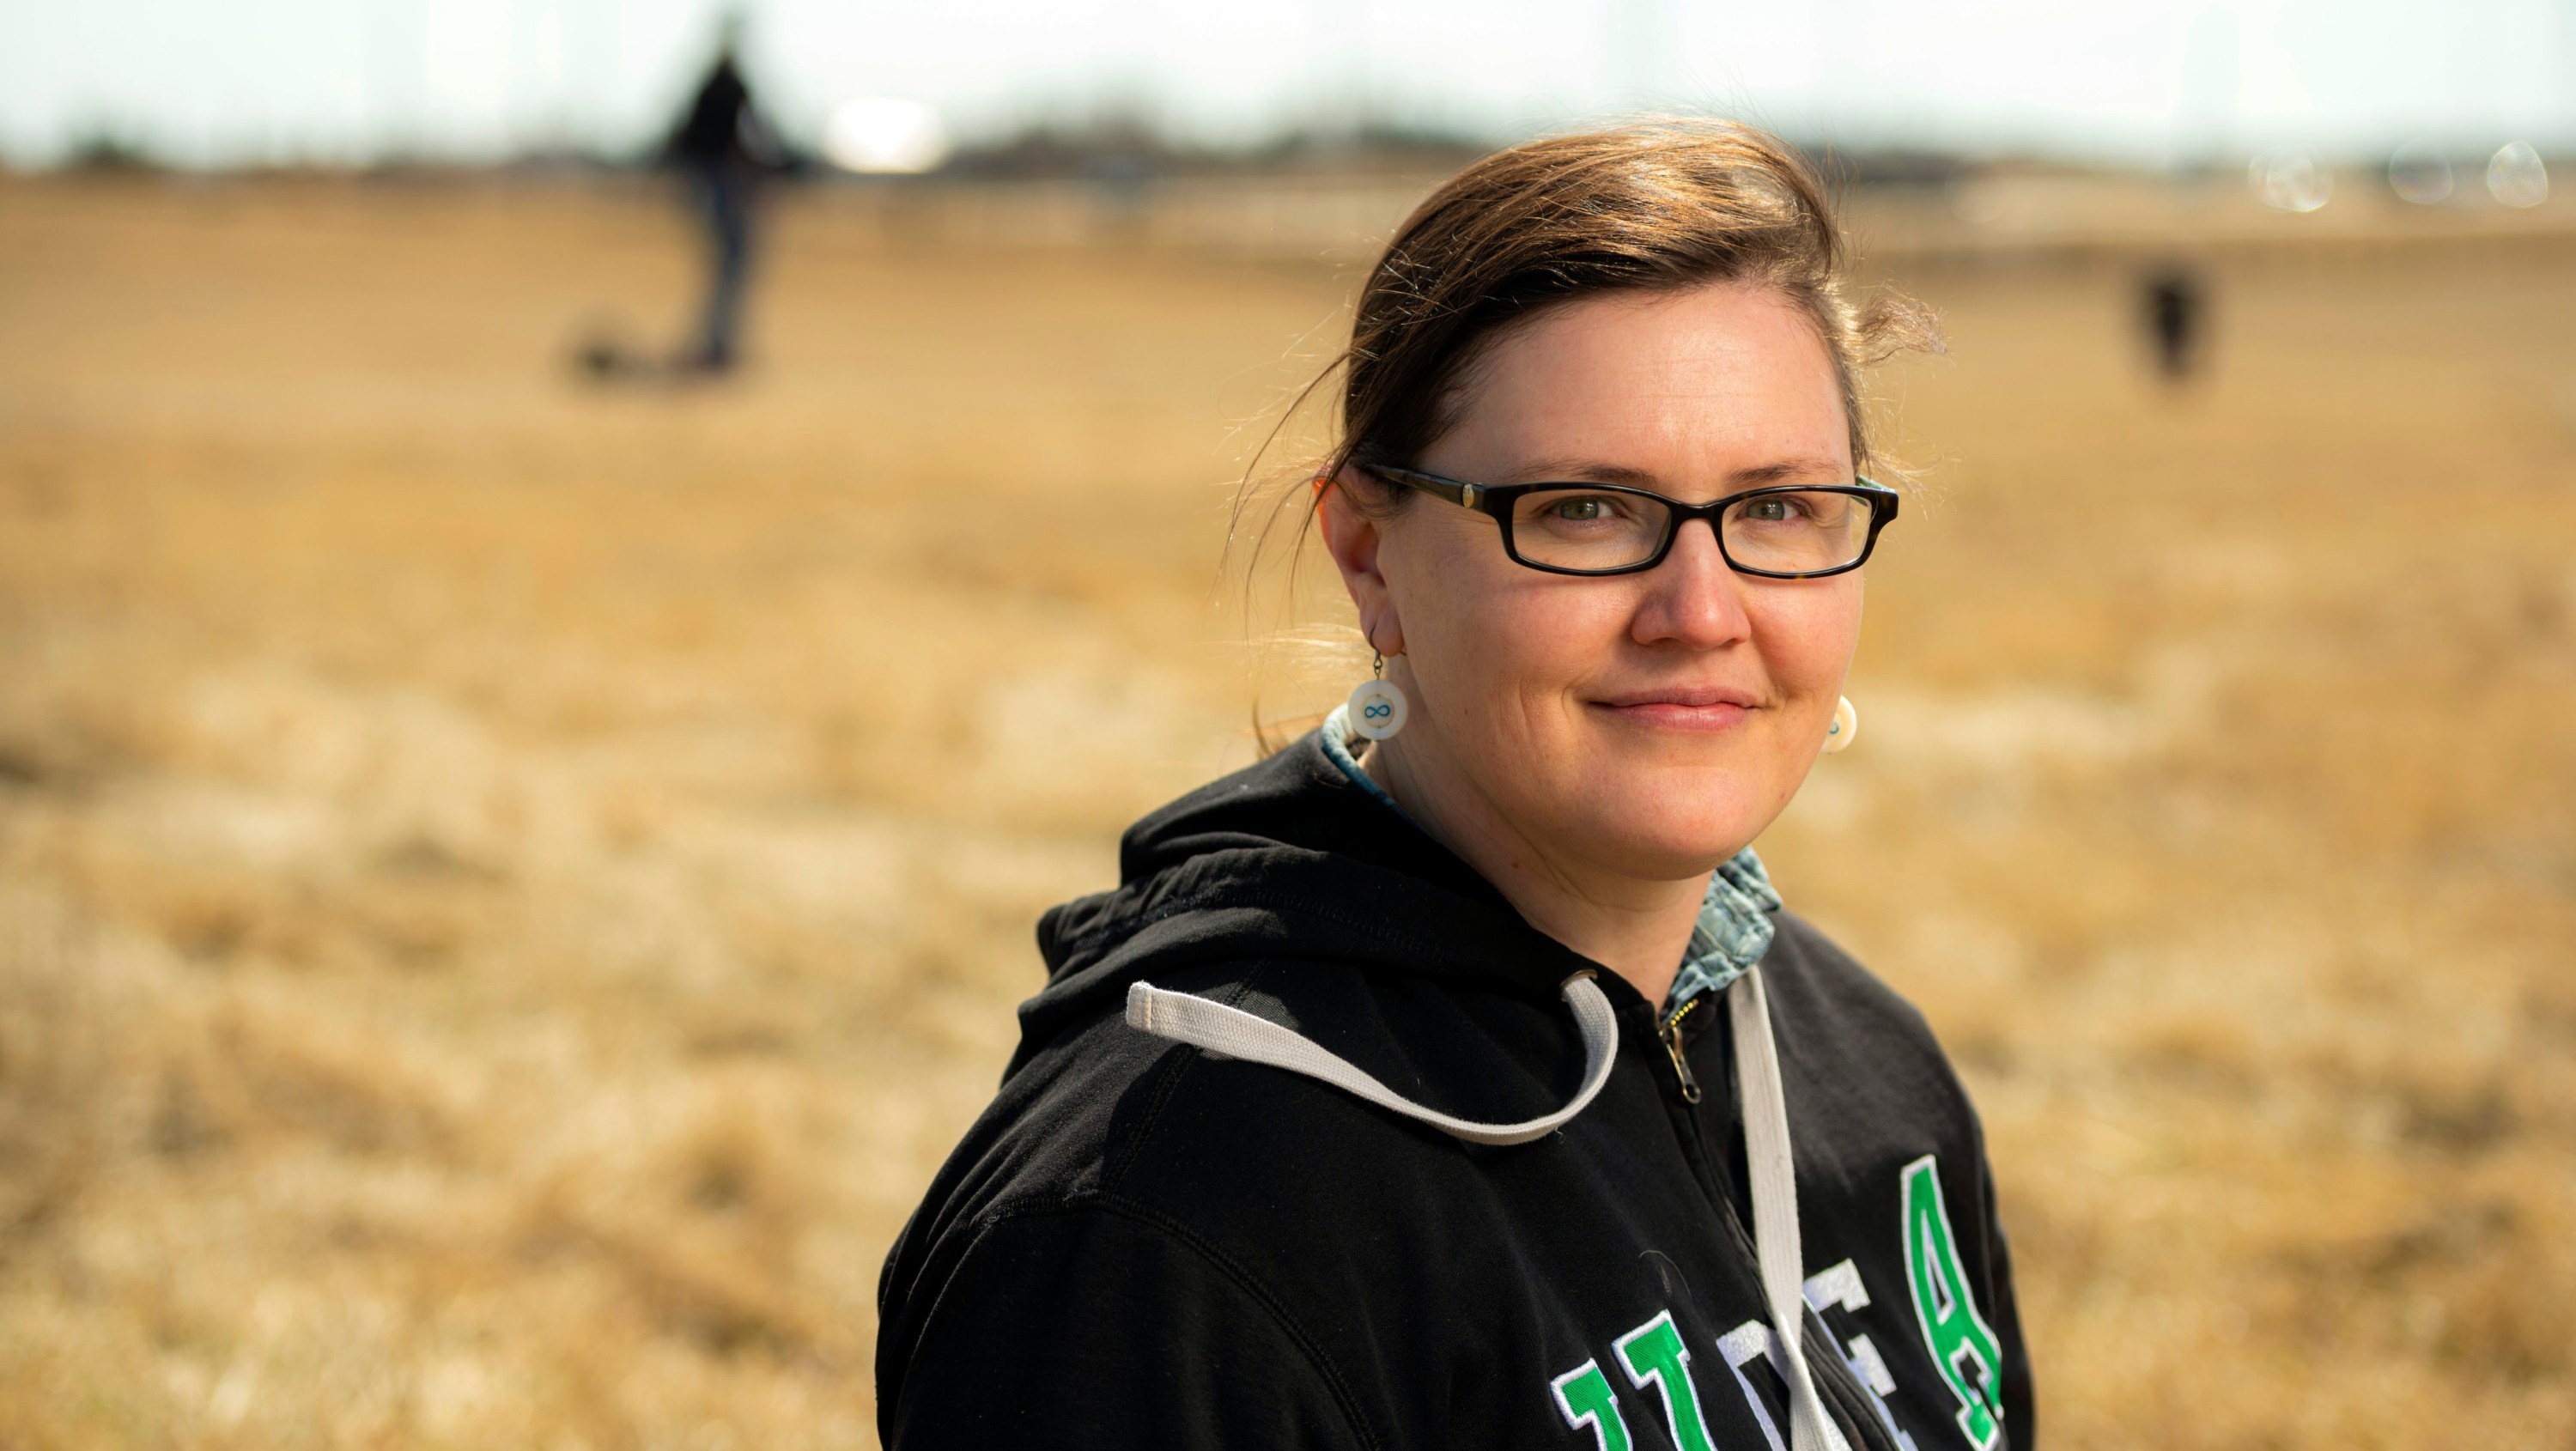 Kisha Supernant is contributing her expertise in Prairie and Indigenous archeology to a major international project bringing together Indigenous knowledges and western science to tackle complex challenges brought on by climate change